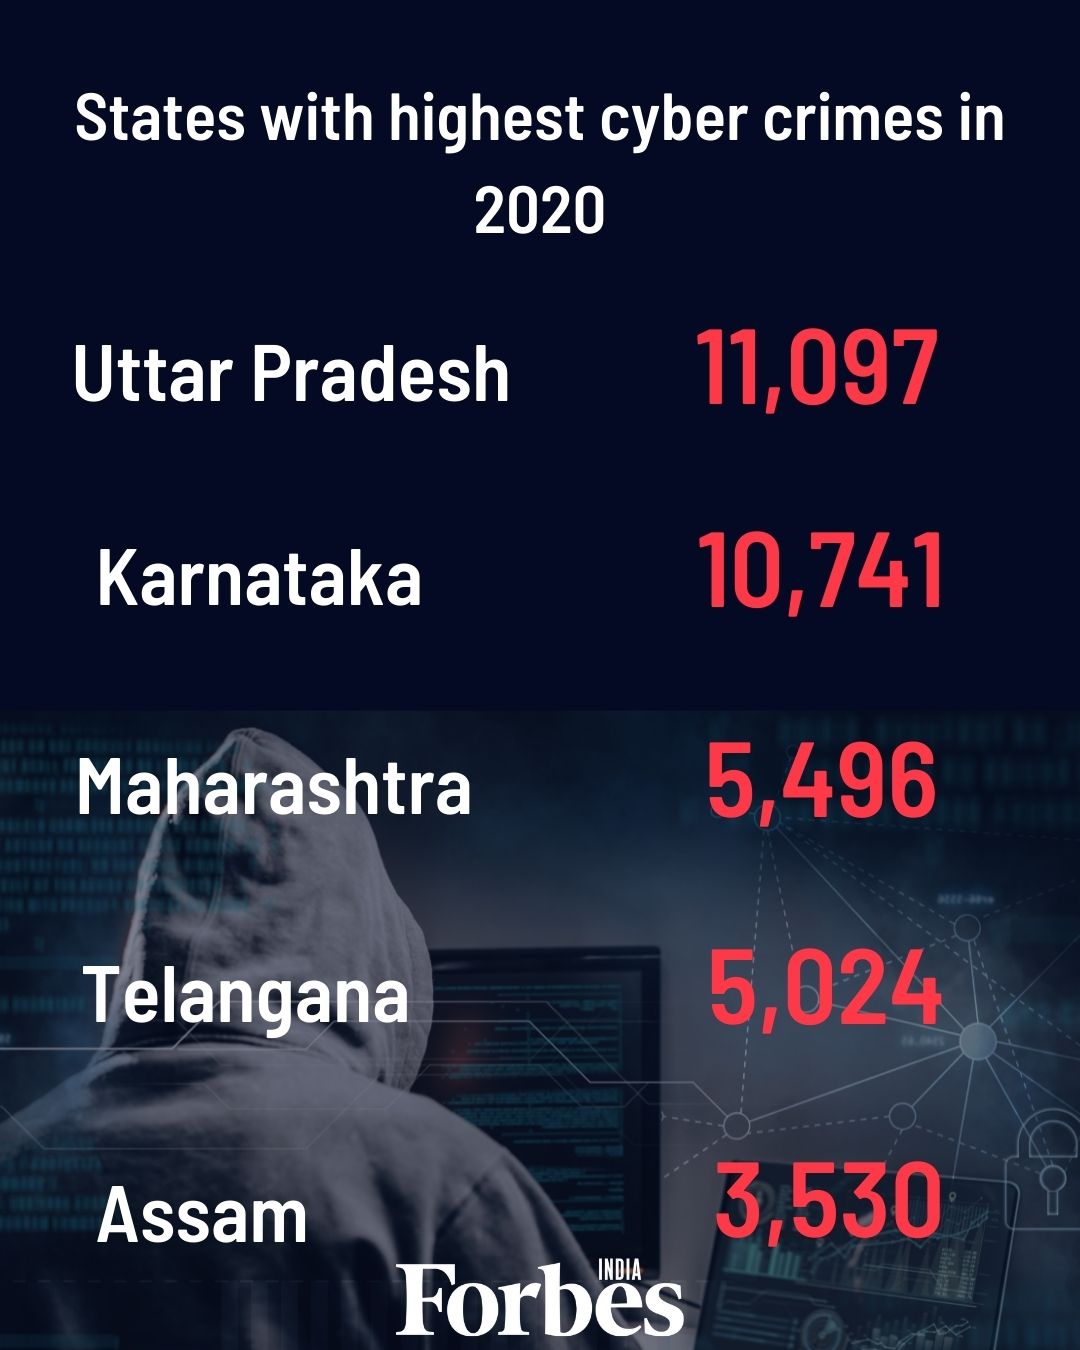 Cyber crime in India saw a 11.8% increase in the number of registered cases in 2020